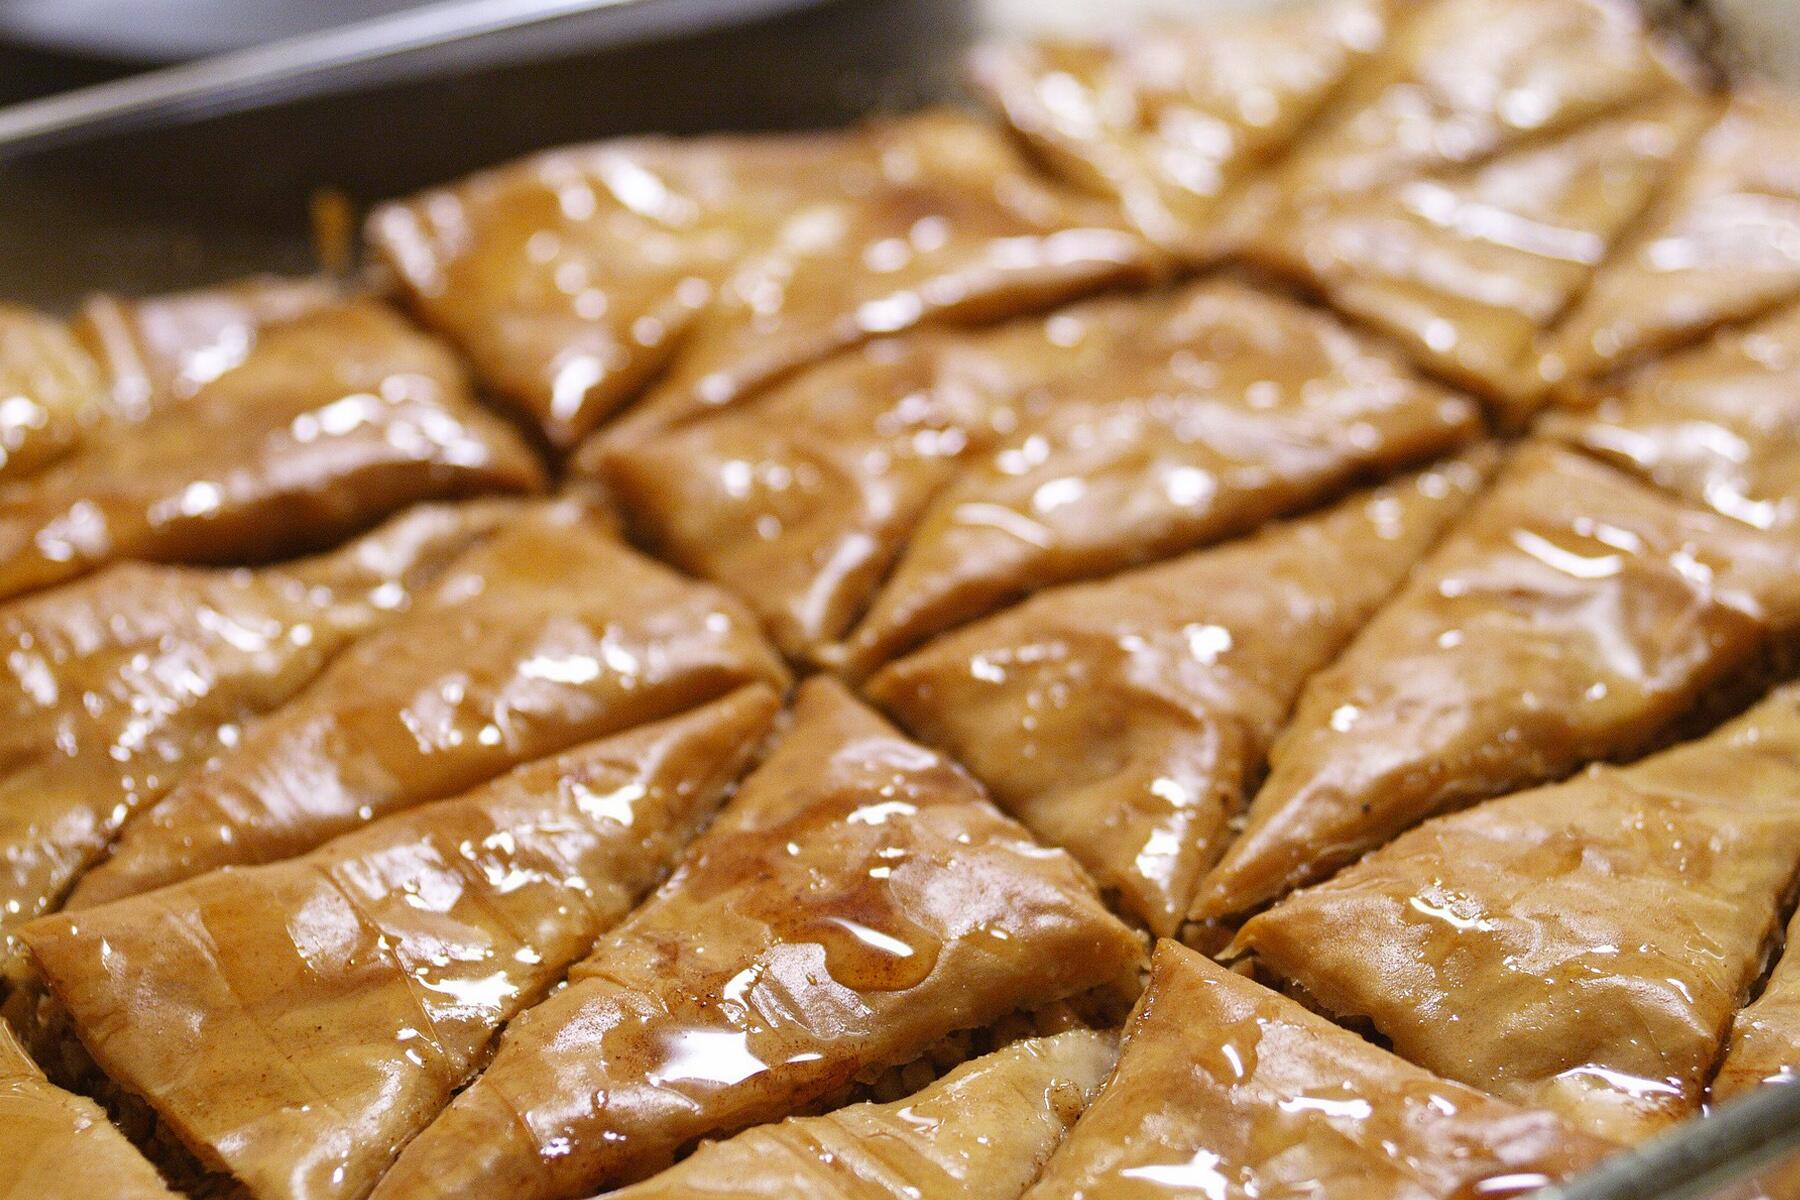 What Are the Origins of Baklava?